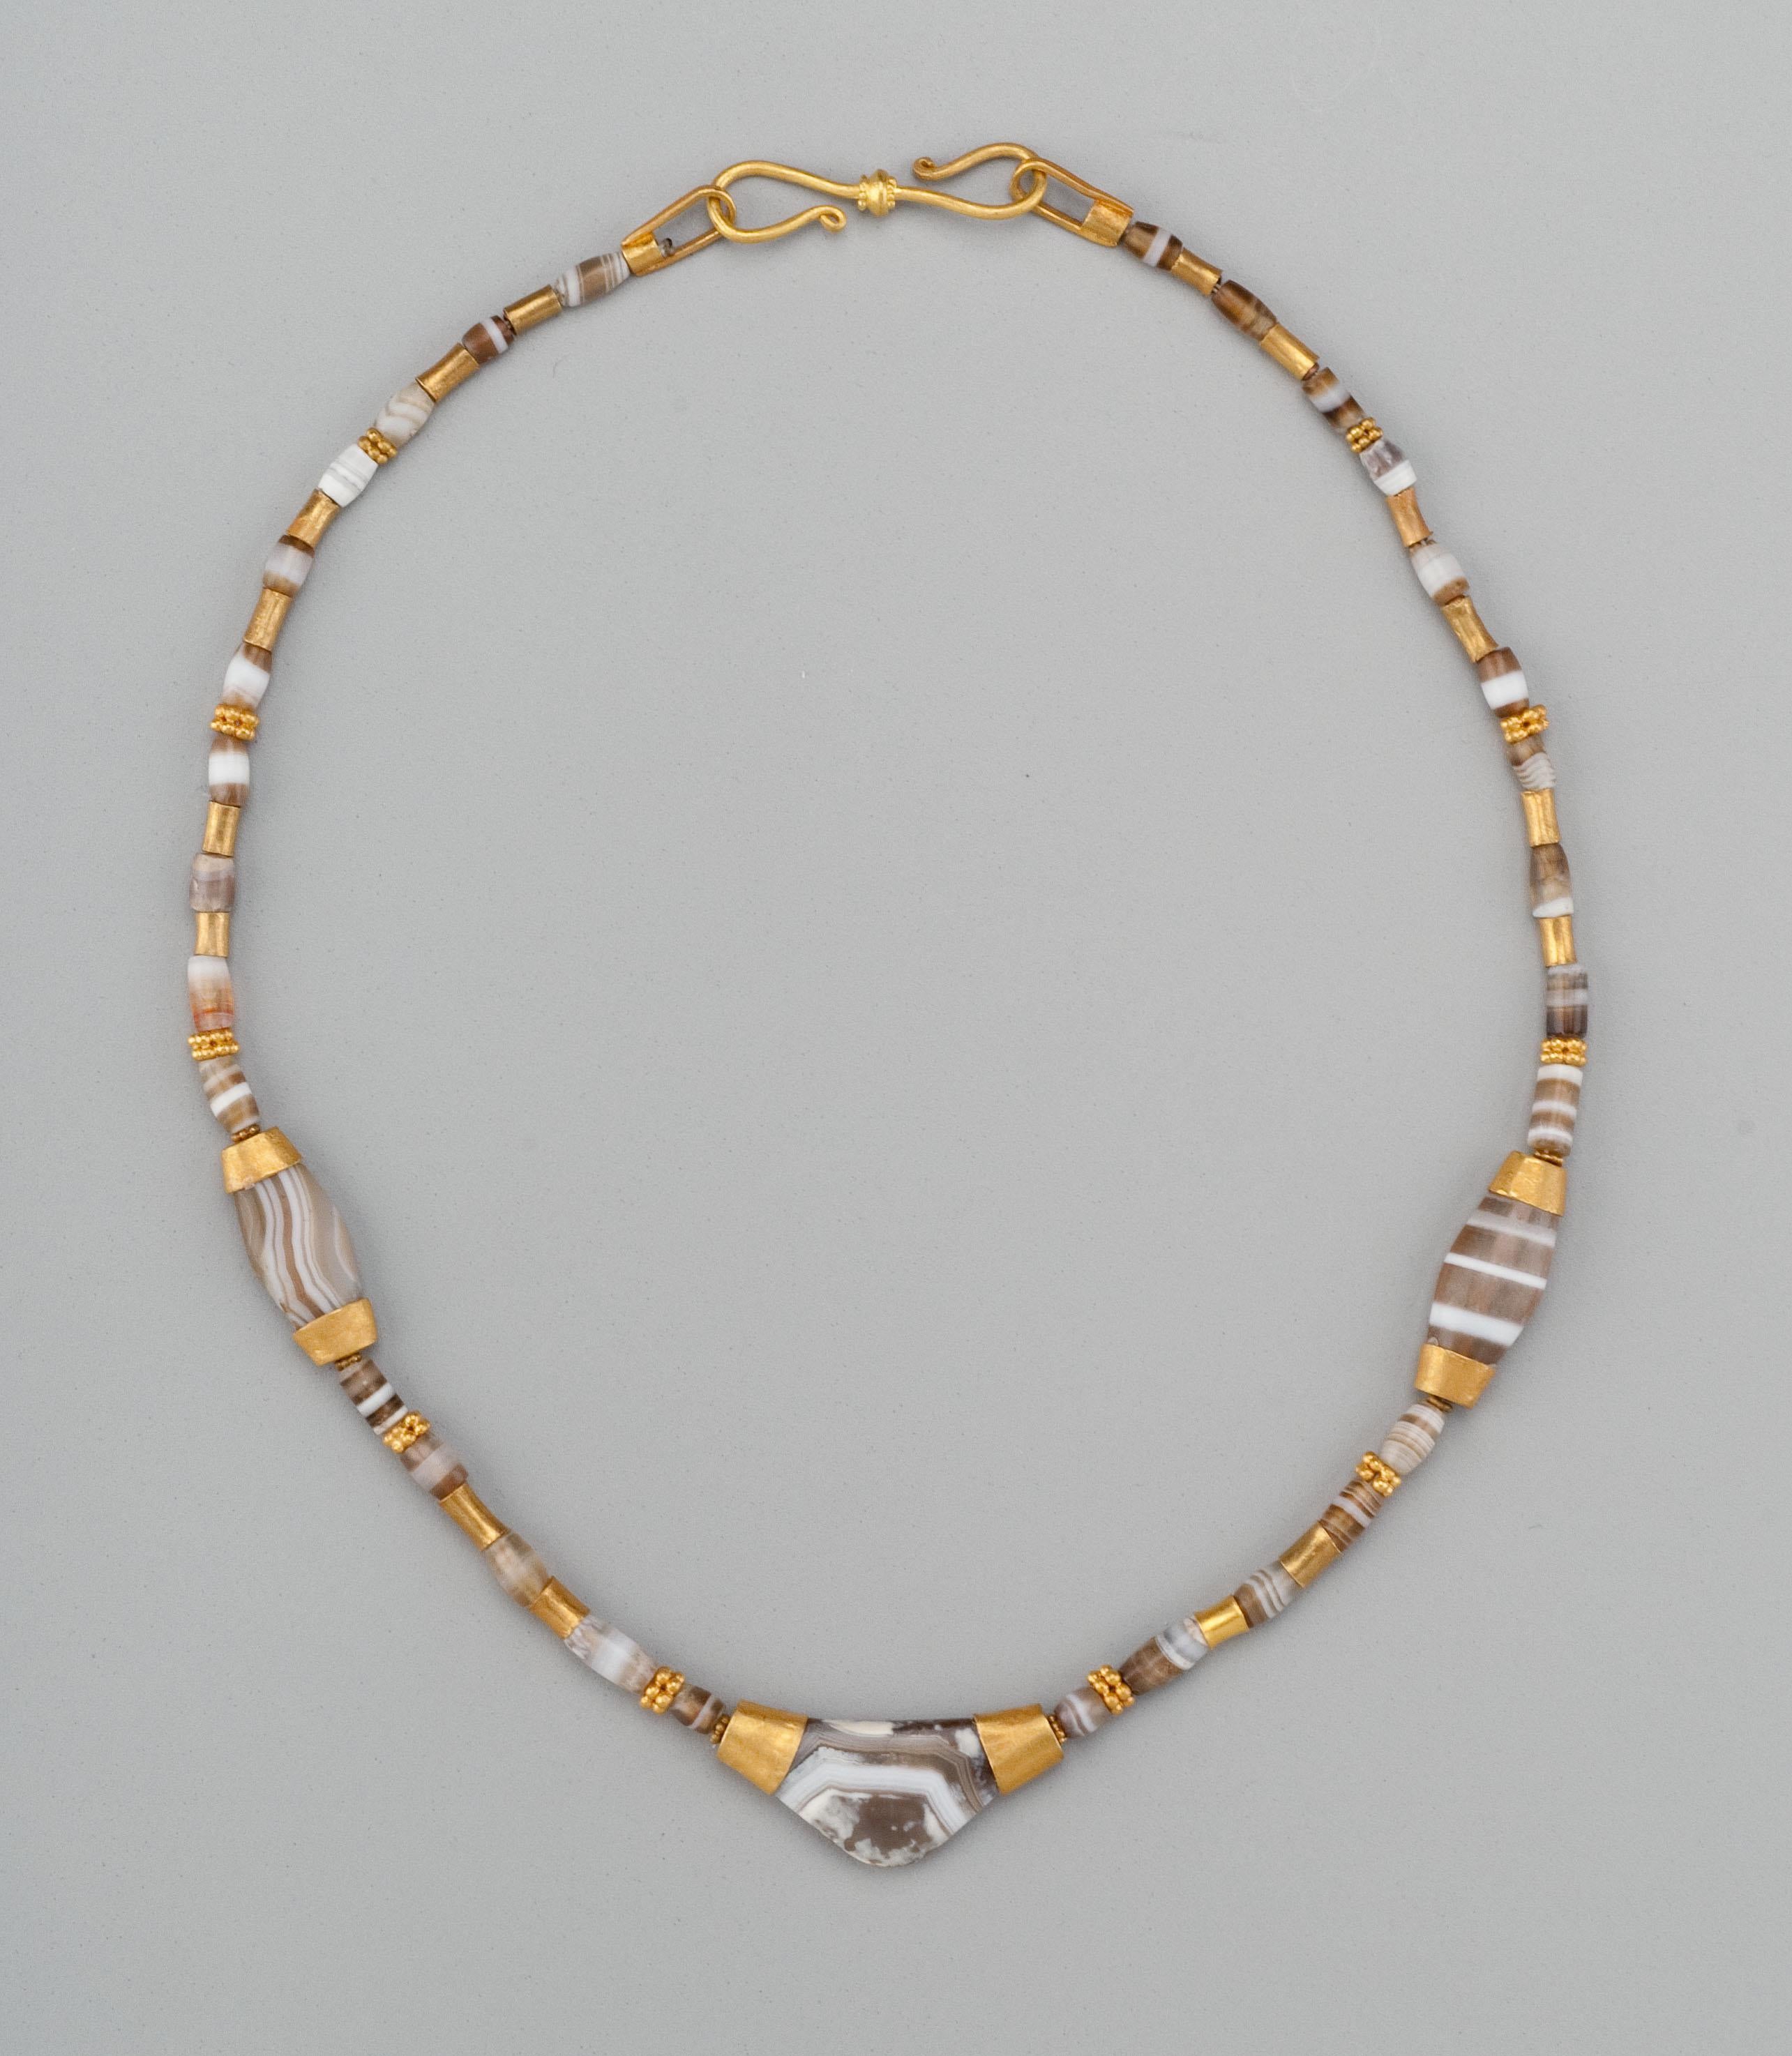 22k gold beads necklace